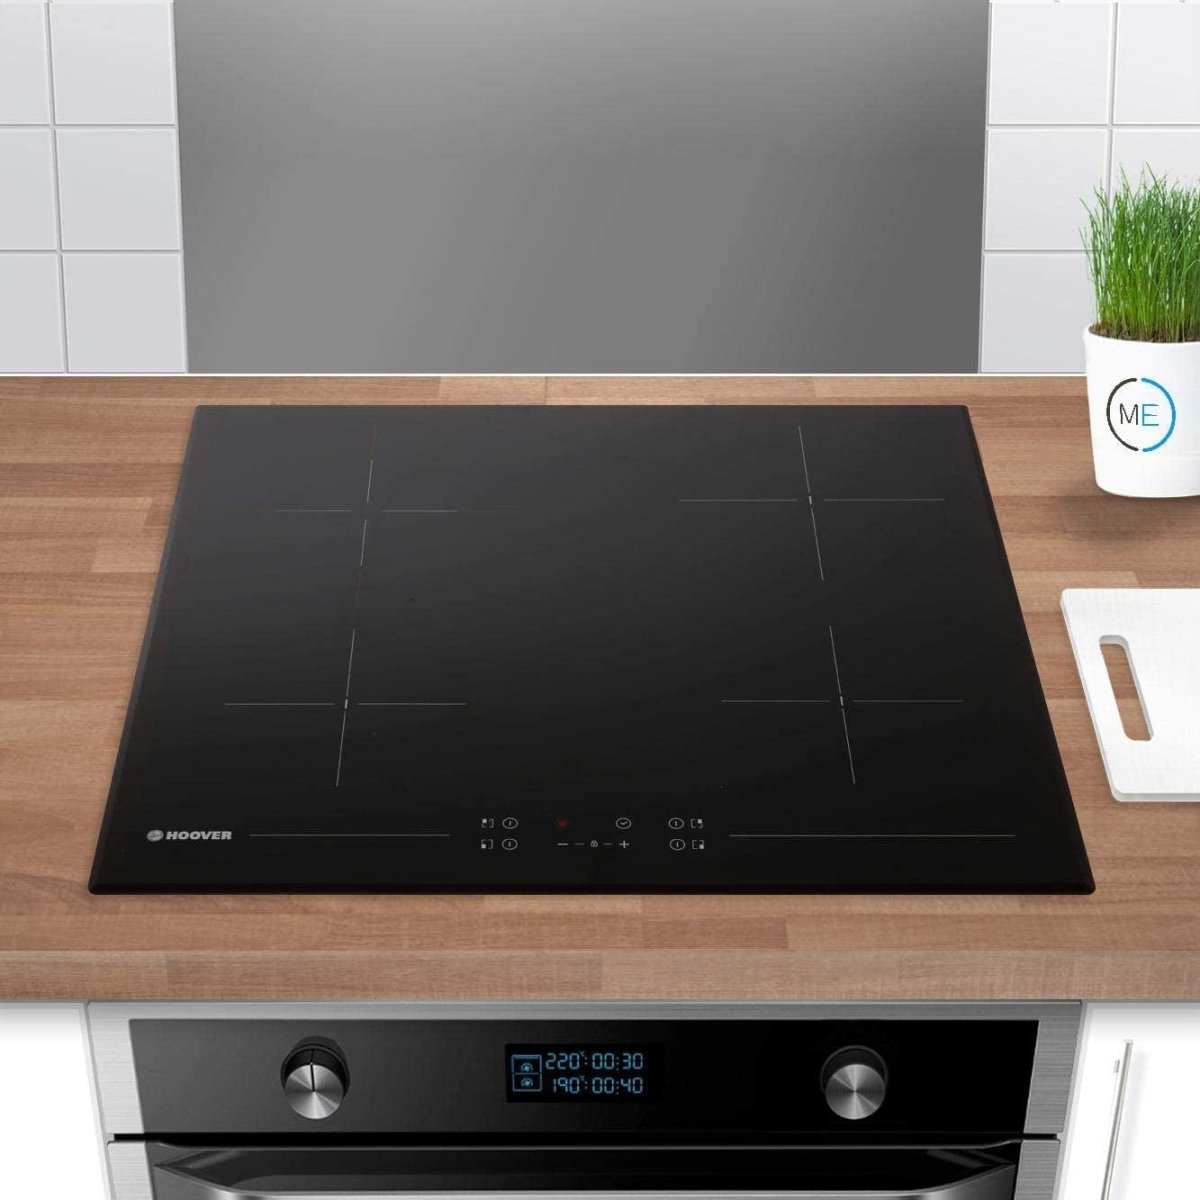 Hoover HH64DB3T 60cm Four Zone Ceramic Hob With Double Zone - Black - Atlantic Electrics